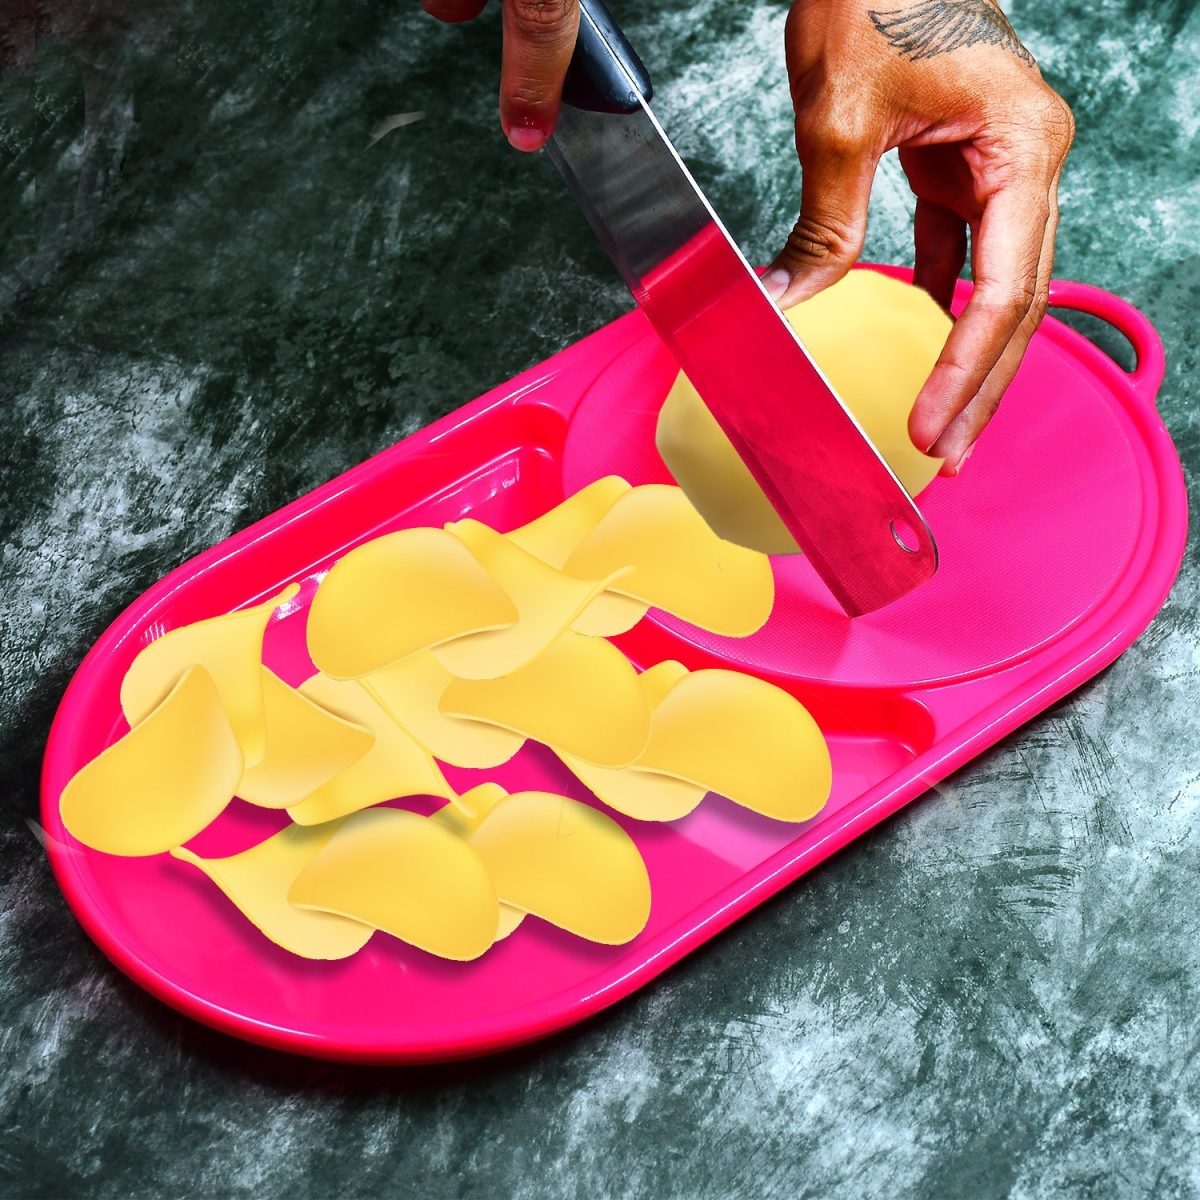 2104 Plastic Chopping Tray Cutting tray for Kitchen